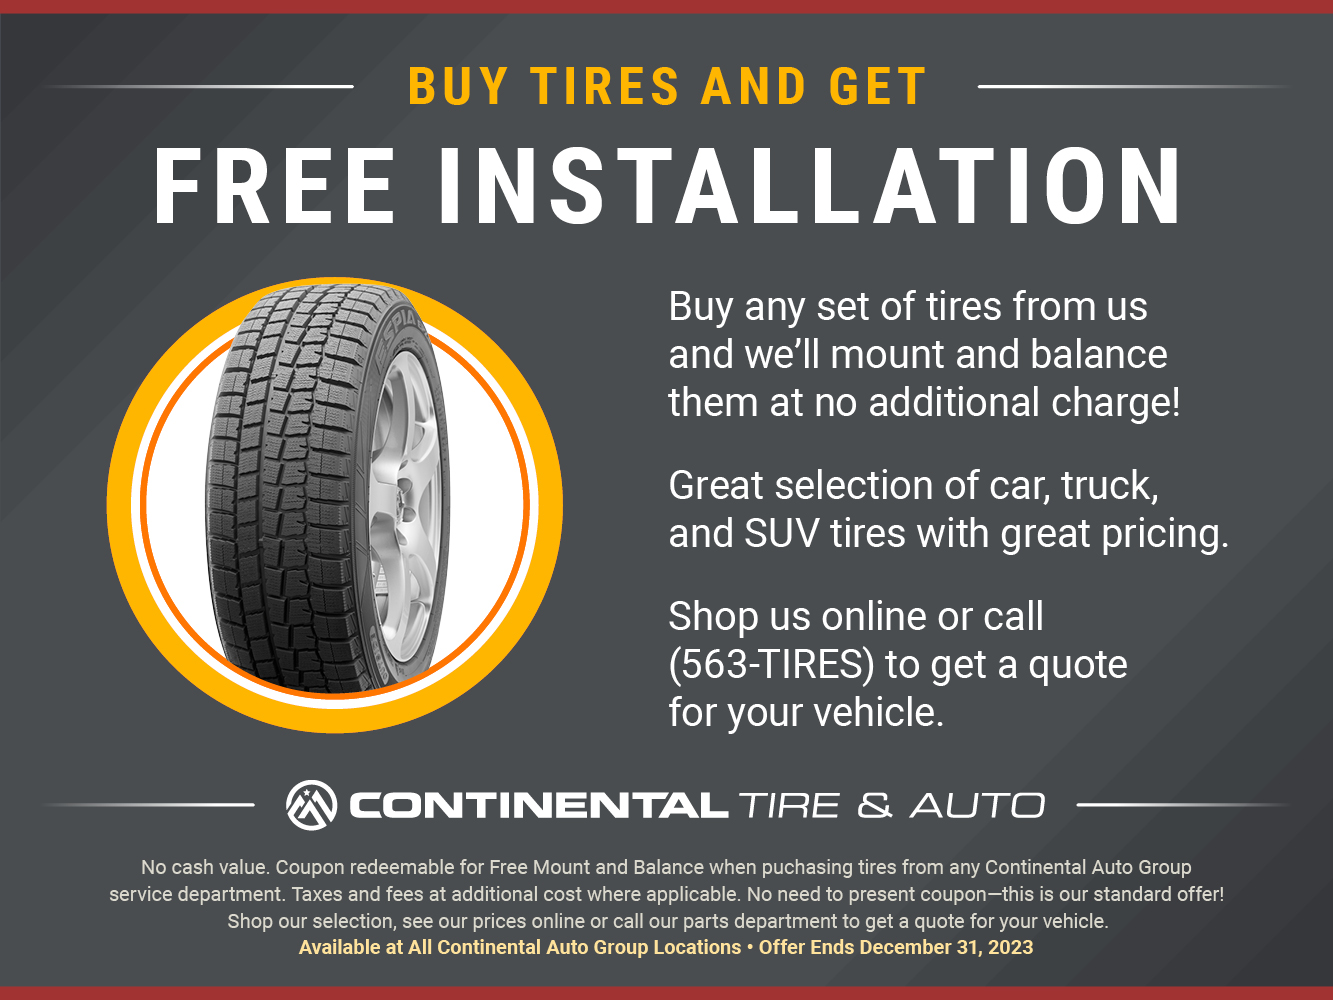 Buy Tires and Get Free Installation